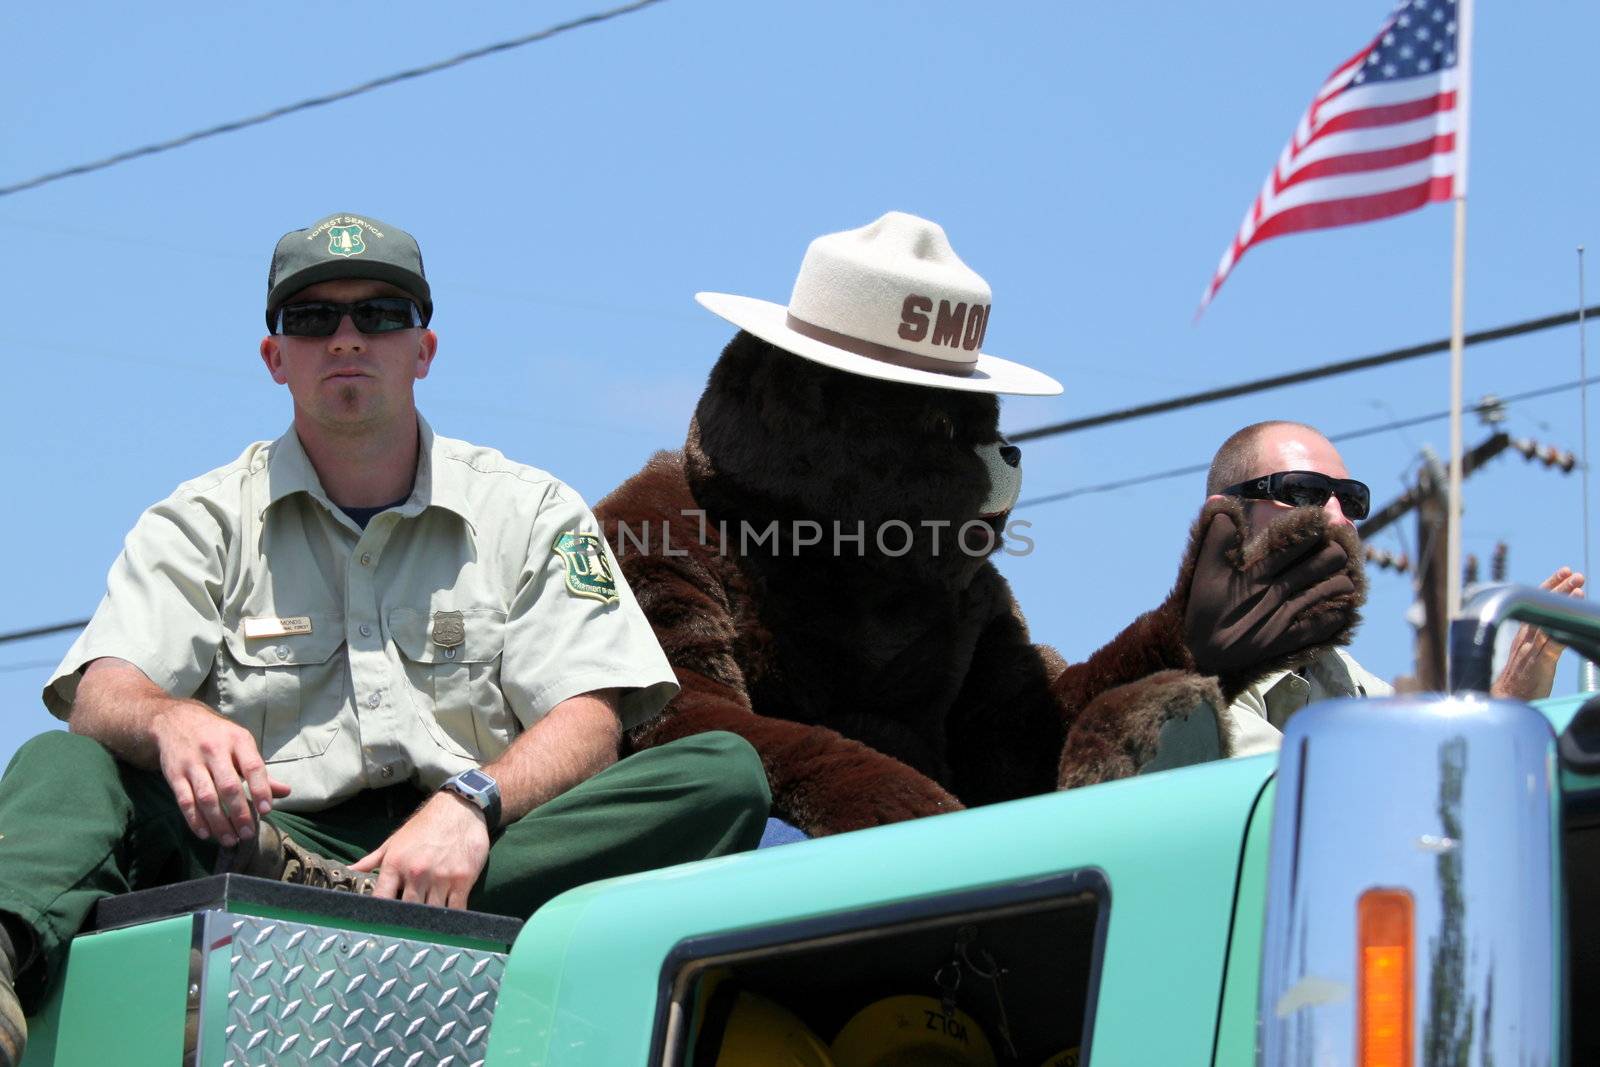 Ojai 4th of July Parade 2010 by hlehnerer